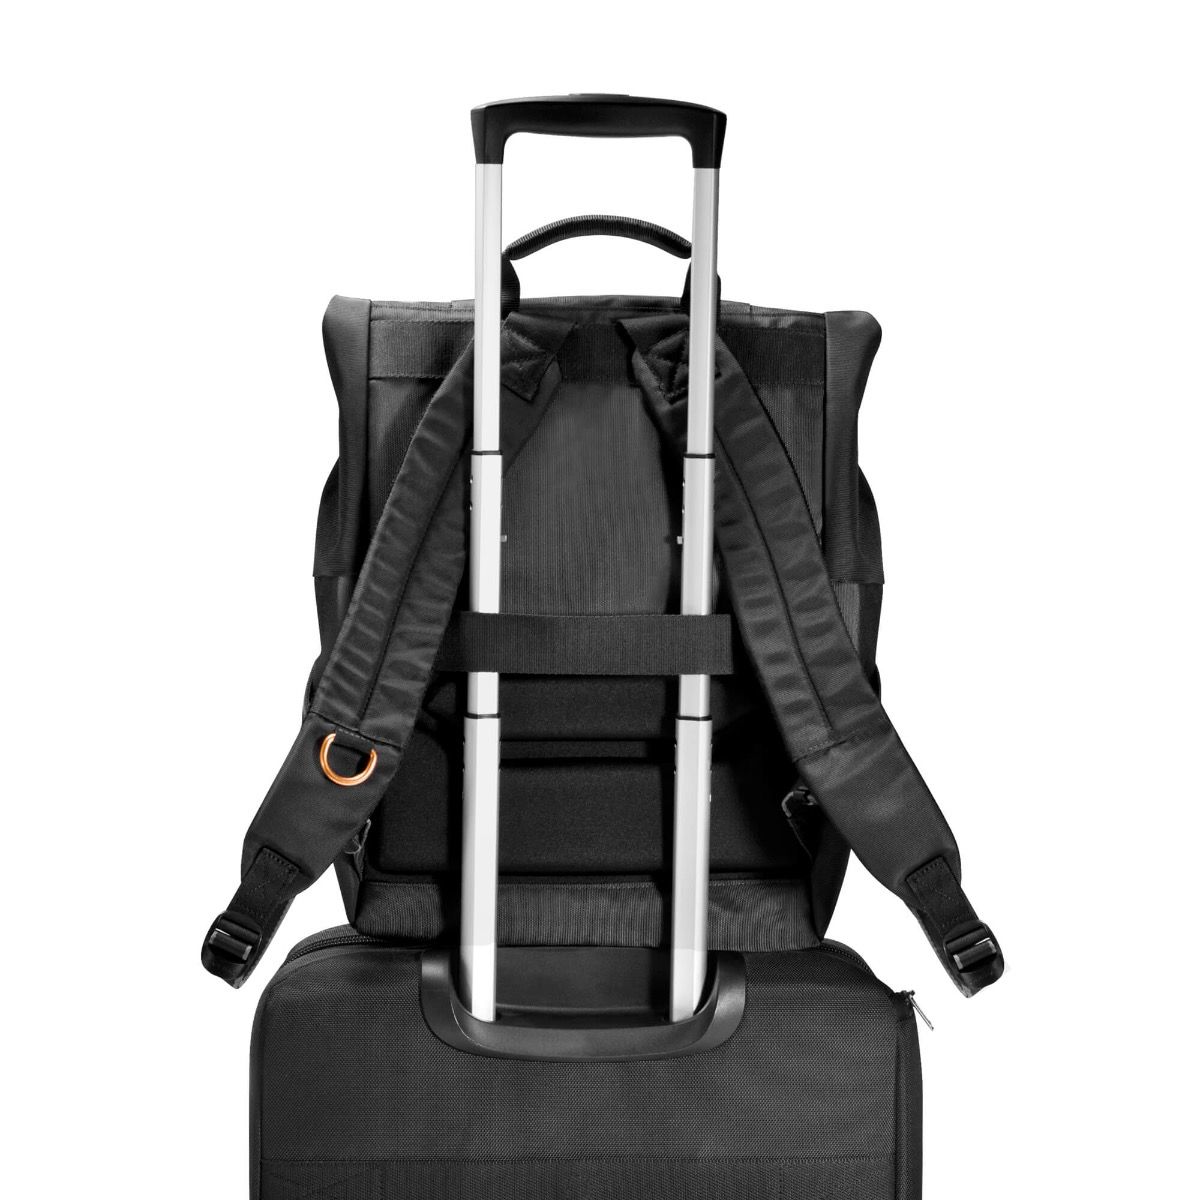 ContemPRO Roll Top Laptop Backpack, up to 15.6-Inch - | EVERKI